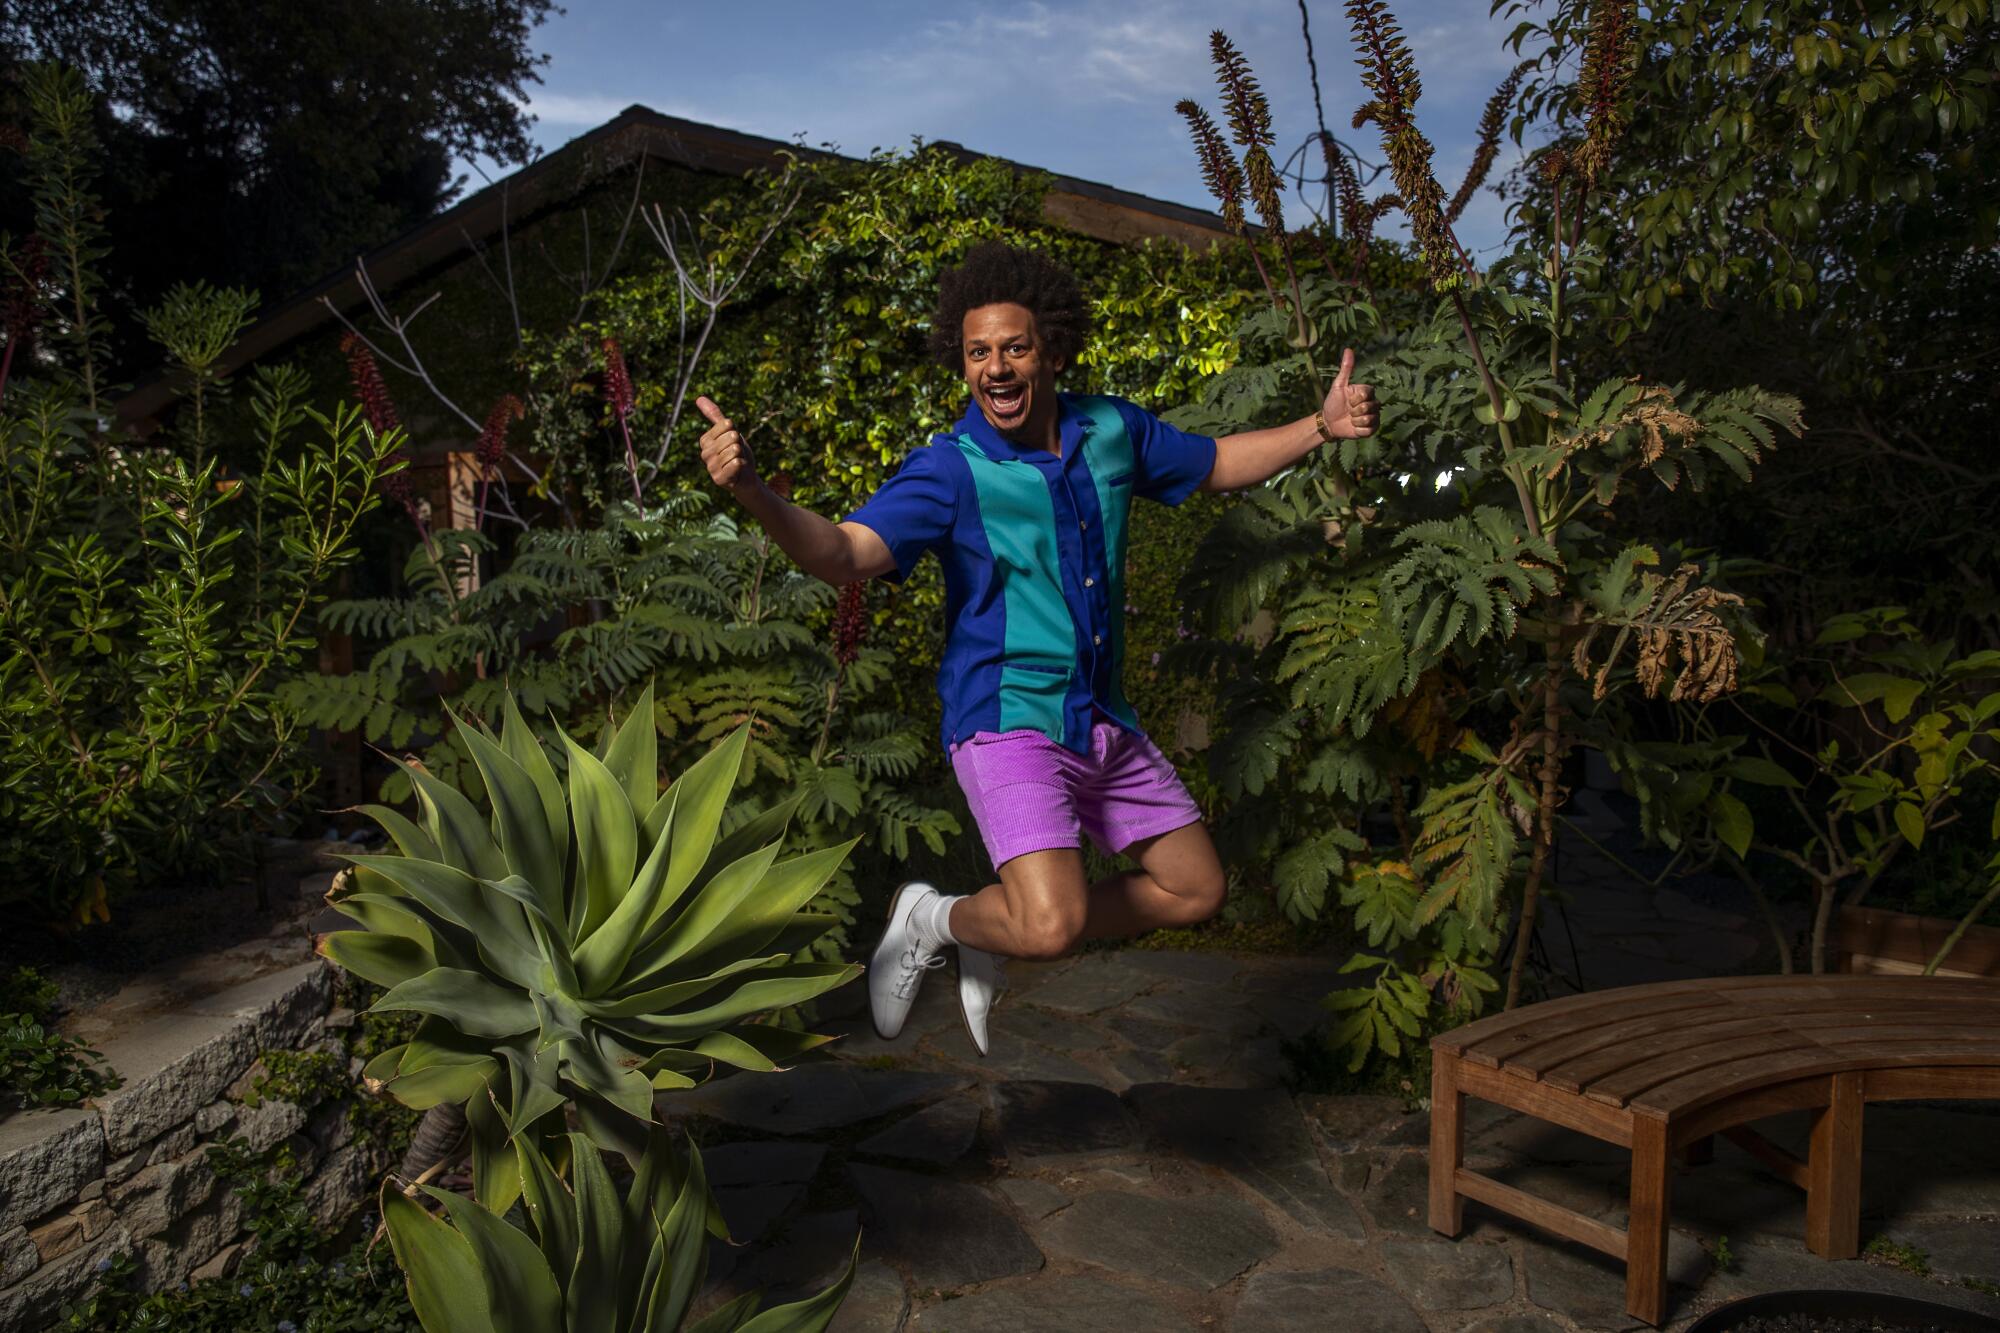 Eric Andre gives double thumbs-up as he jumps in the air